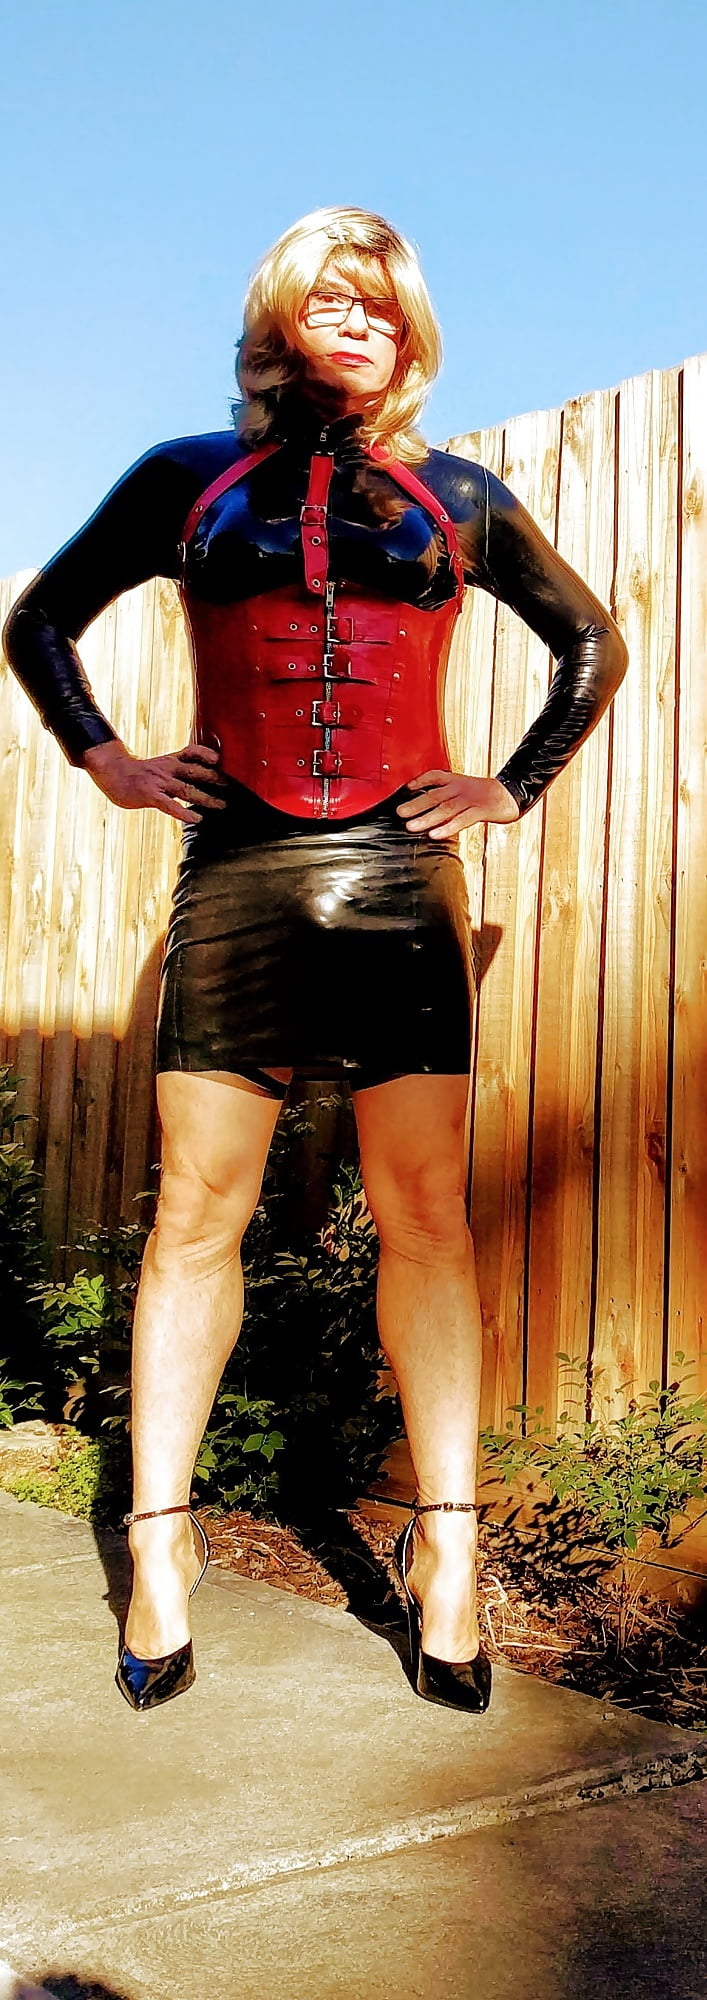 New latex skirt on a sunny Melbourne day #107021283